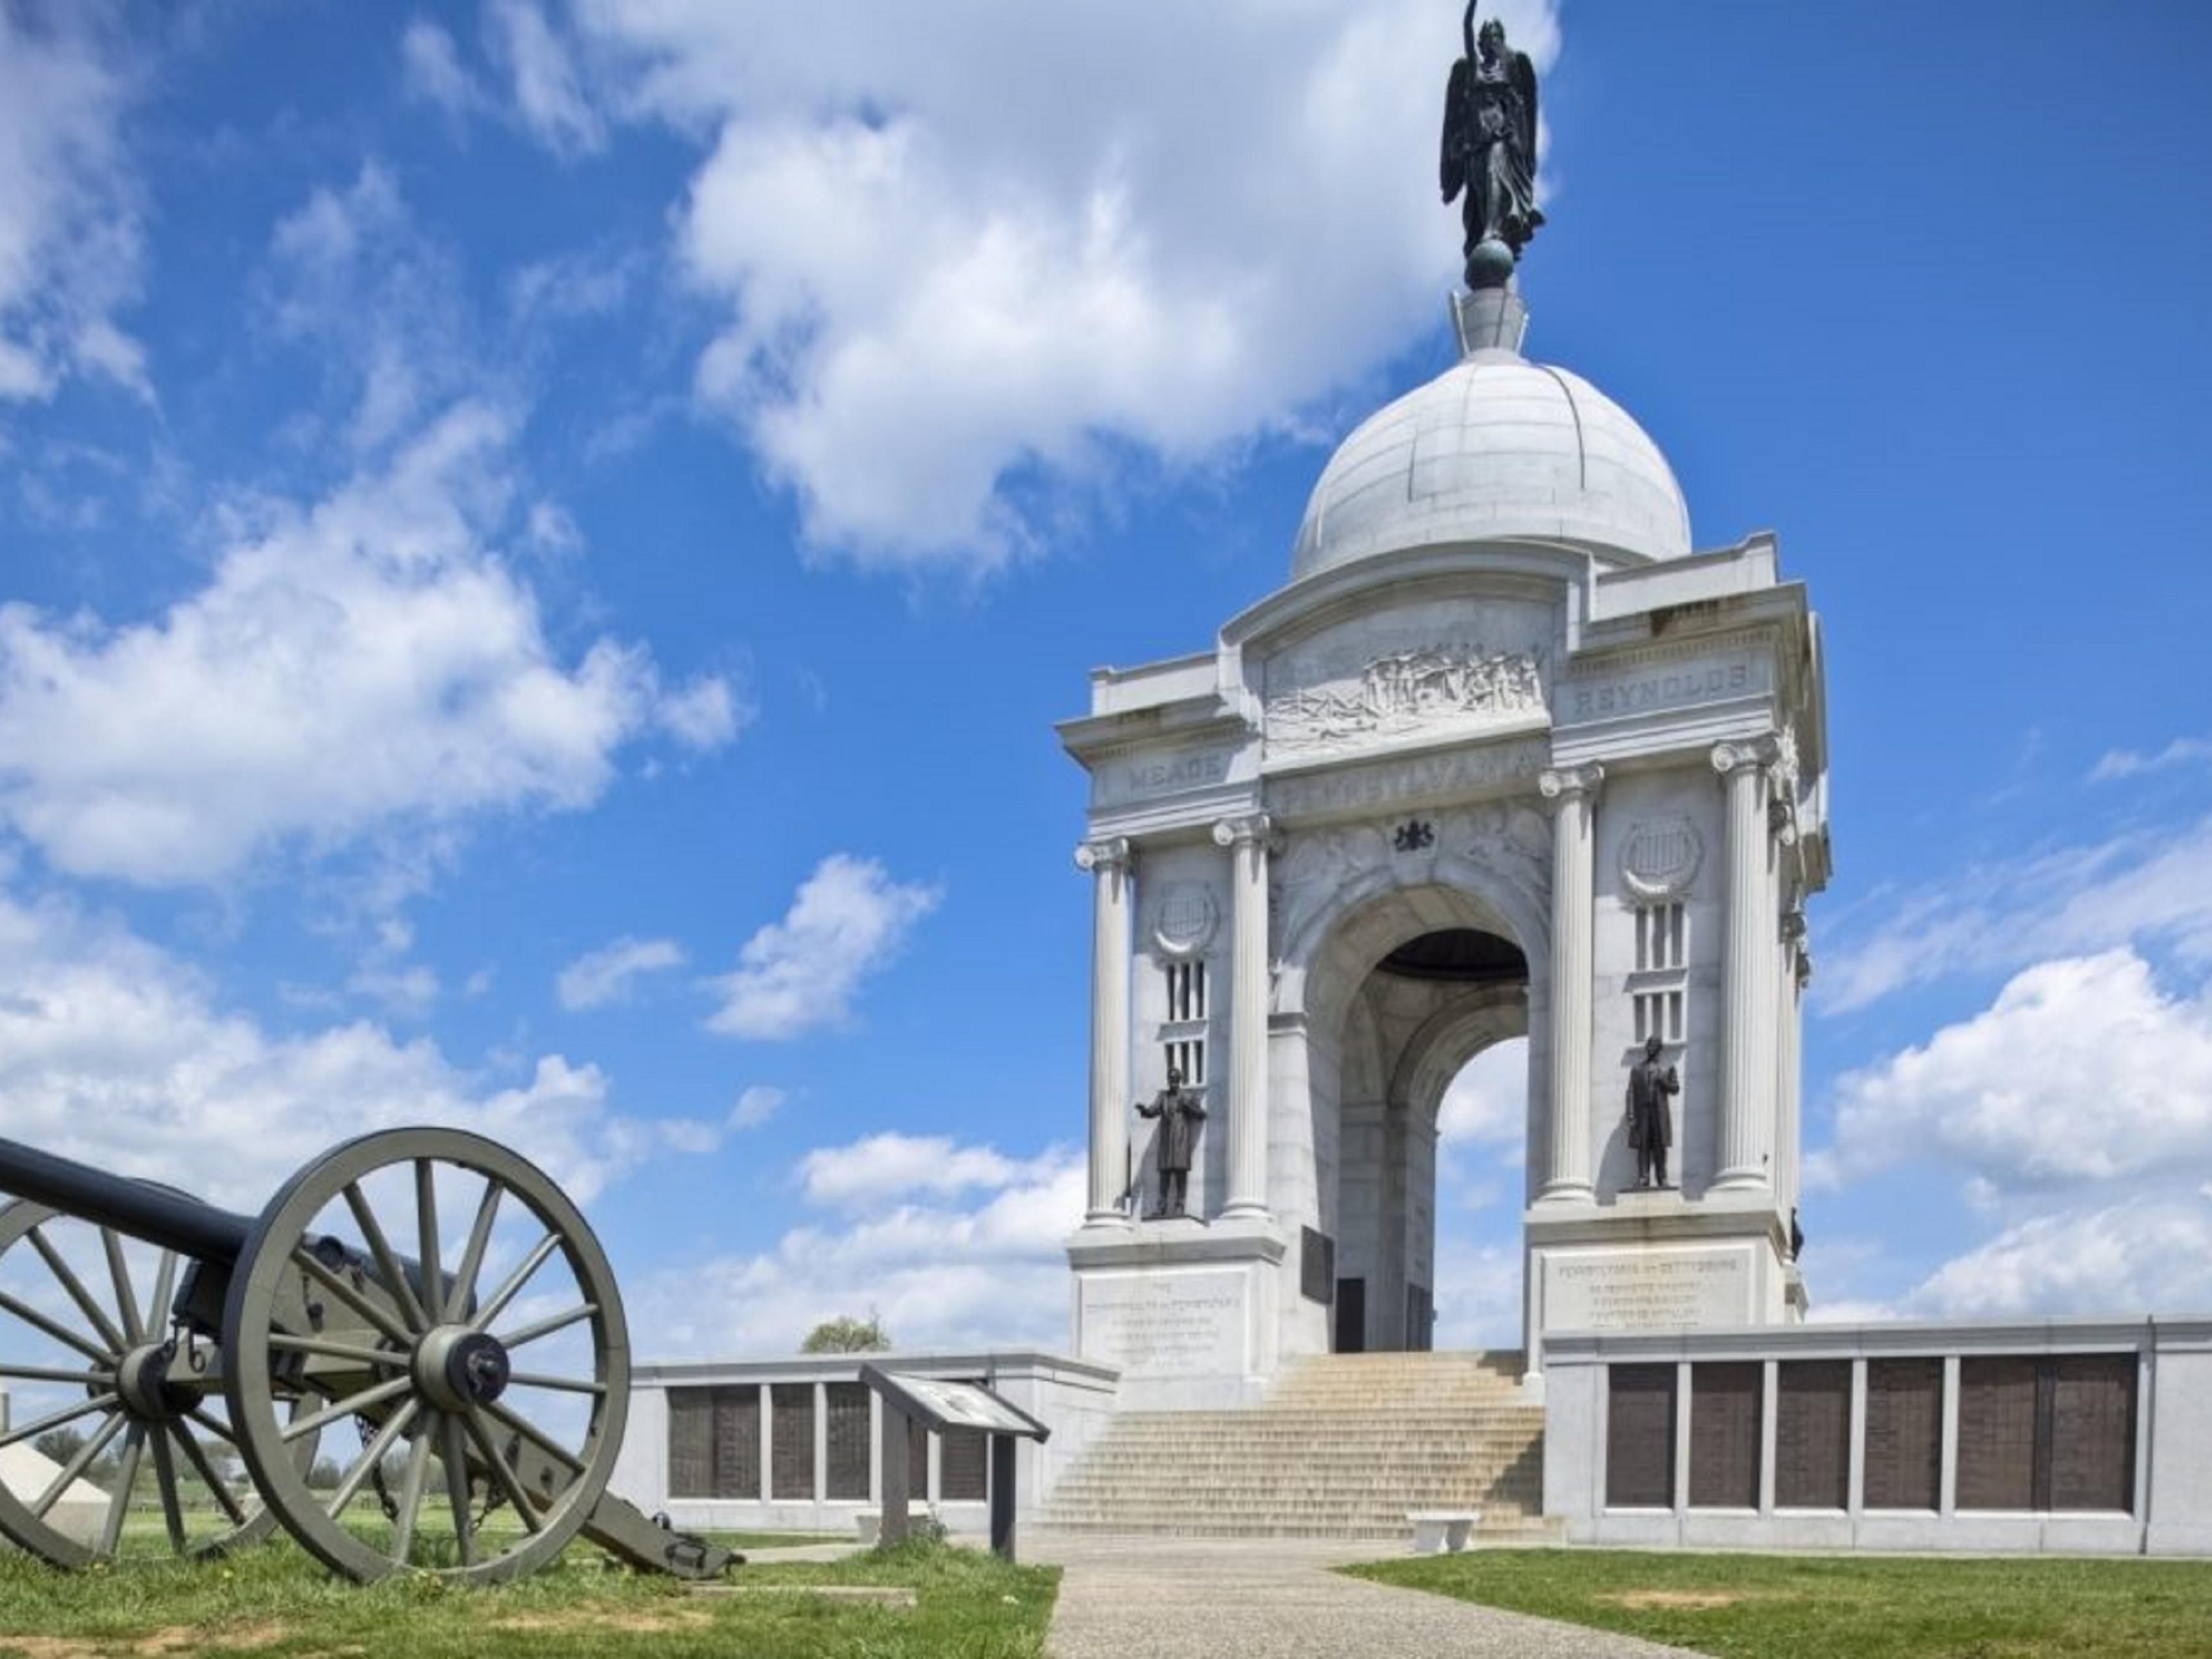 Minutes from the Gettysburg National Military Park and Monuments